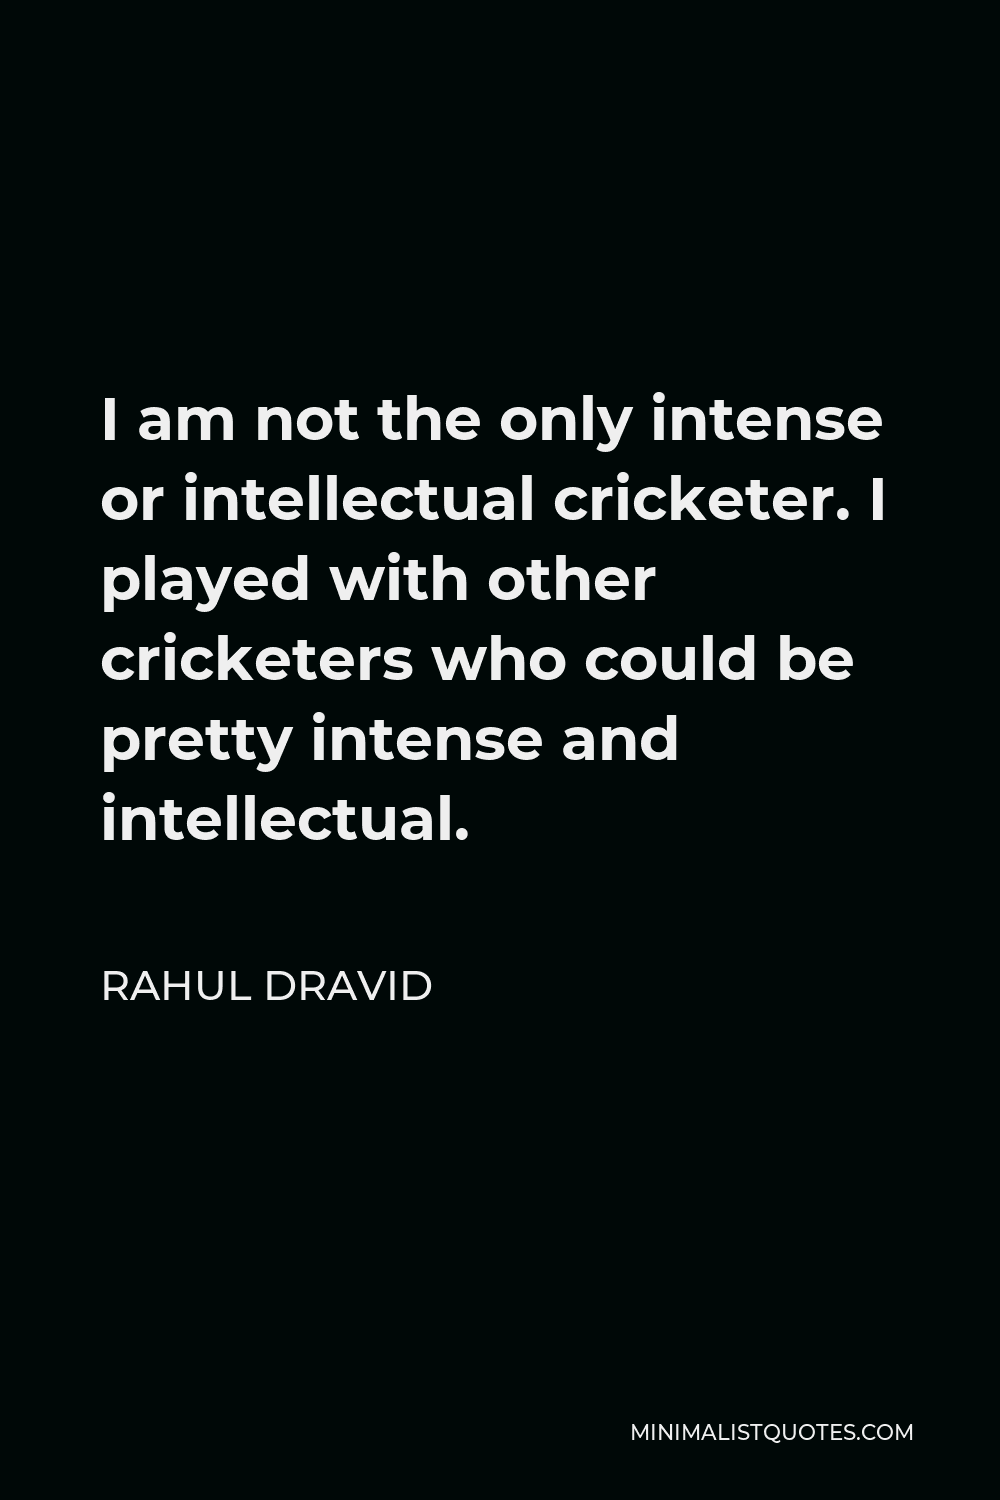 Rahul Dravid Quote - I am not the only intense or intellectual cricketer. I played with other cricketers who could be pretty intense and intellectual.